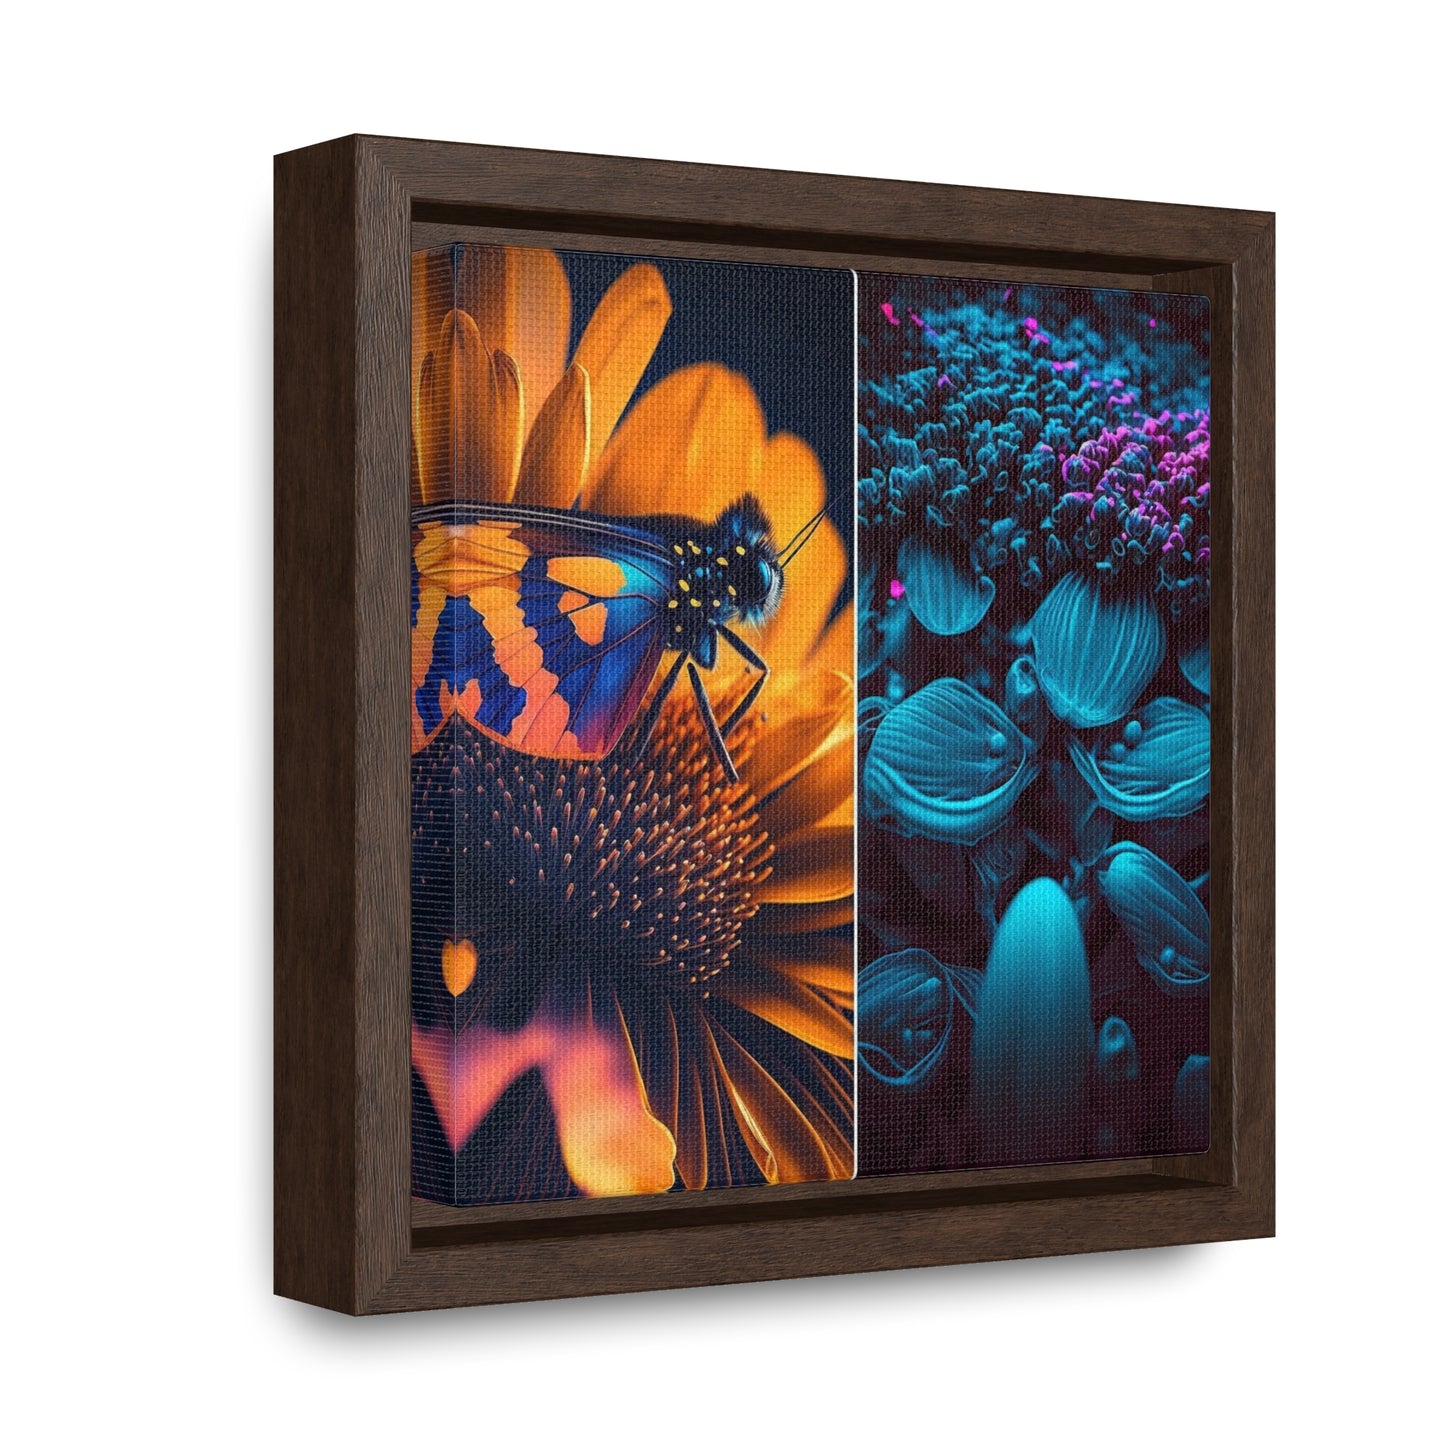 Gallery Canvas Wraps, Square Frame Macro Reef Florescent 1